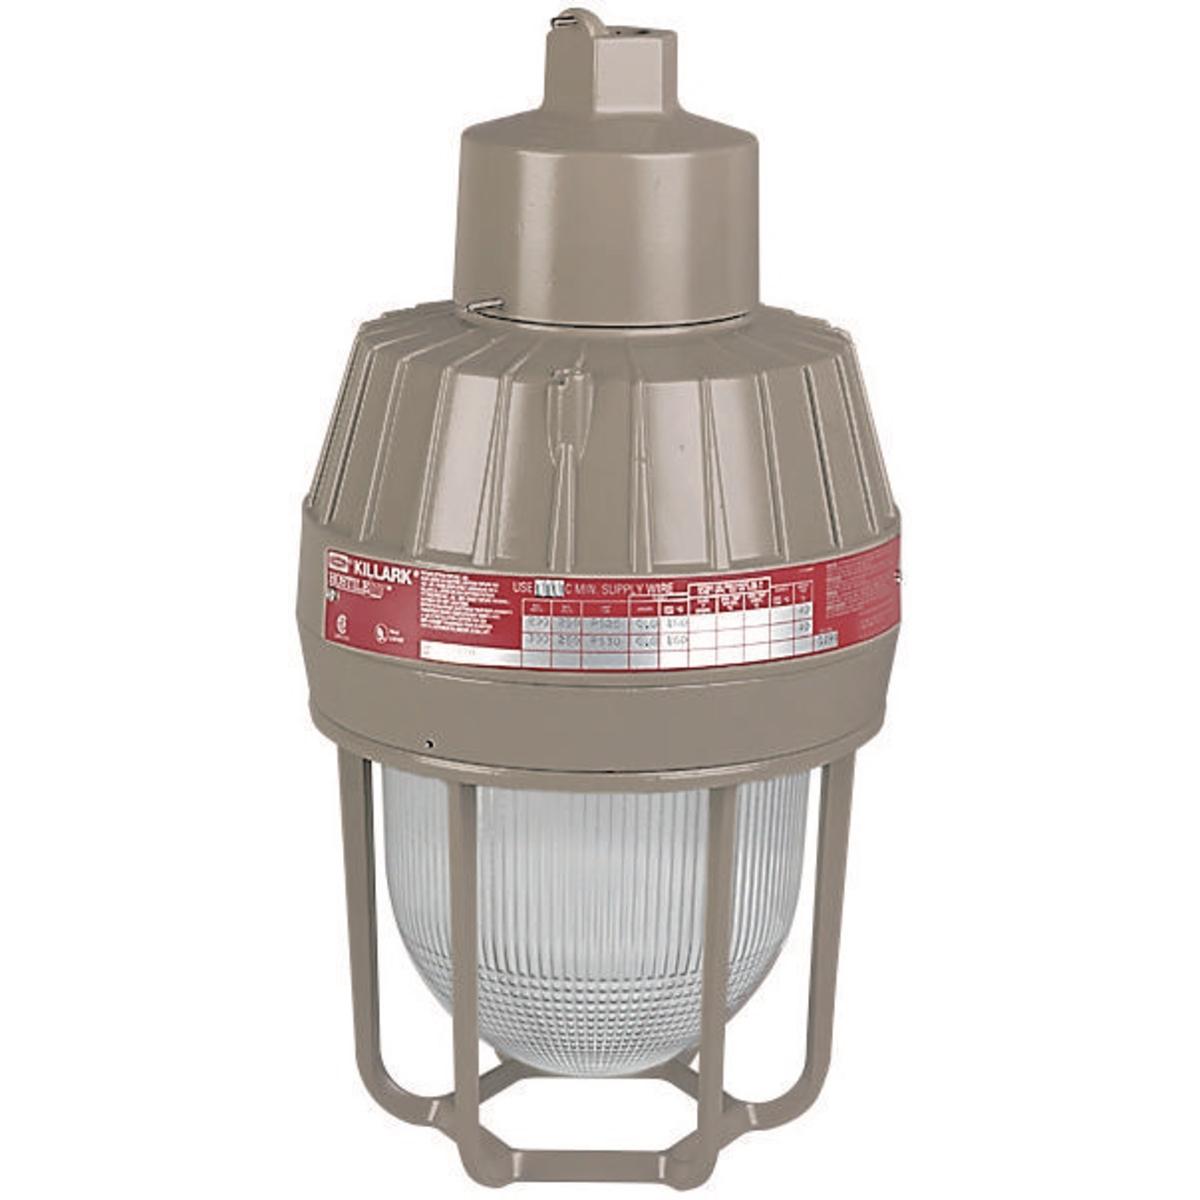 Hubbell EMI15A2 Incandescent 150W 3/4" Pendant  ; Four light sources—Incandescent, compact fluorescent, high pressure sodium and metal halide ; Mounting choice—Pendant, ceiling, 25˚ stanchion or 90˚ wall mount, all with “wireless” design that allows fast, easy fixture in